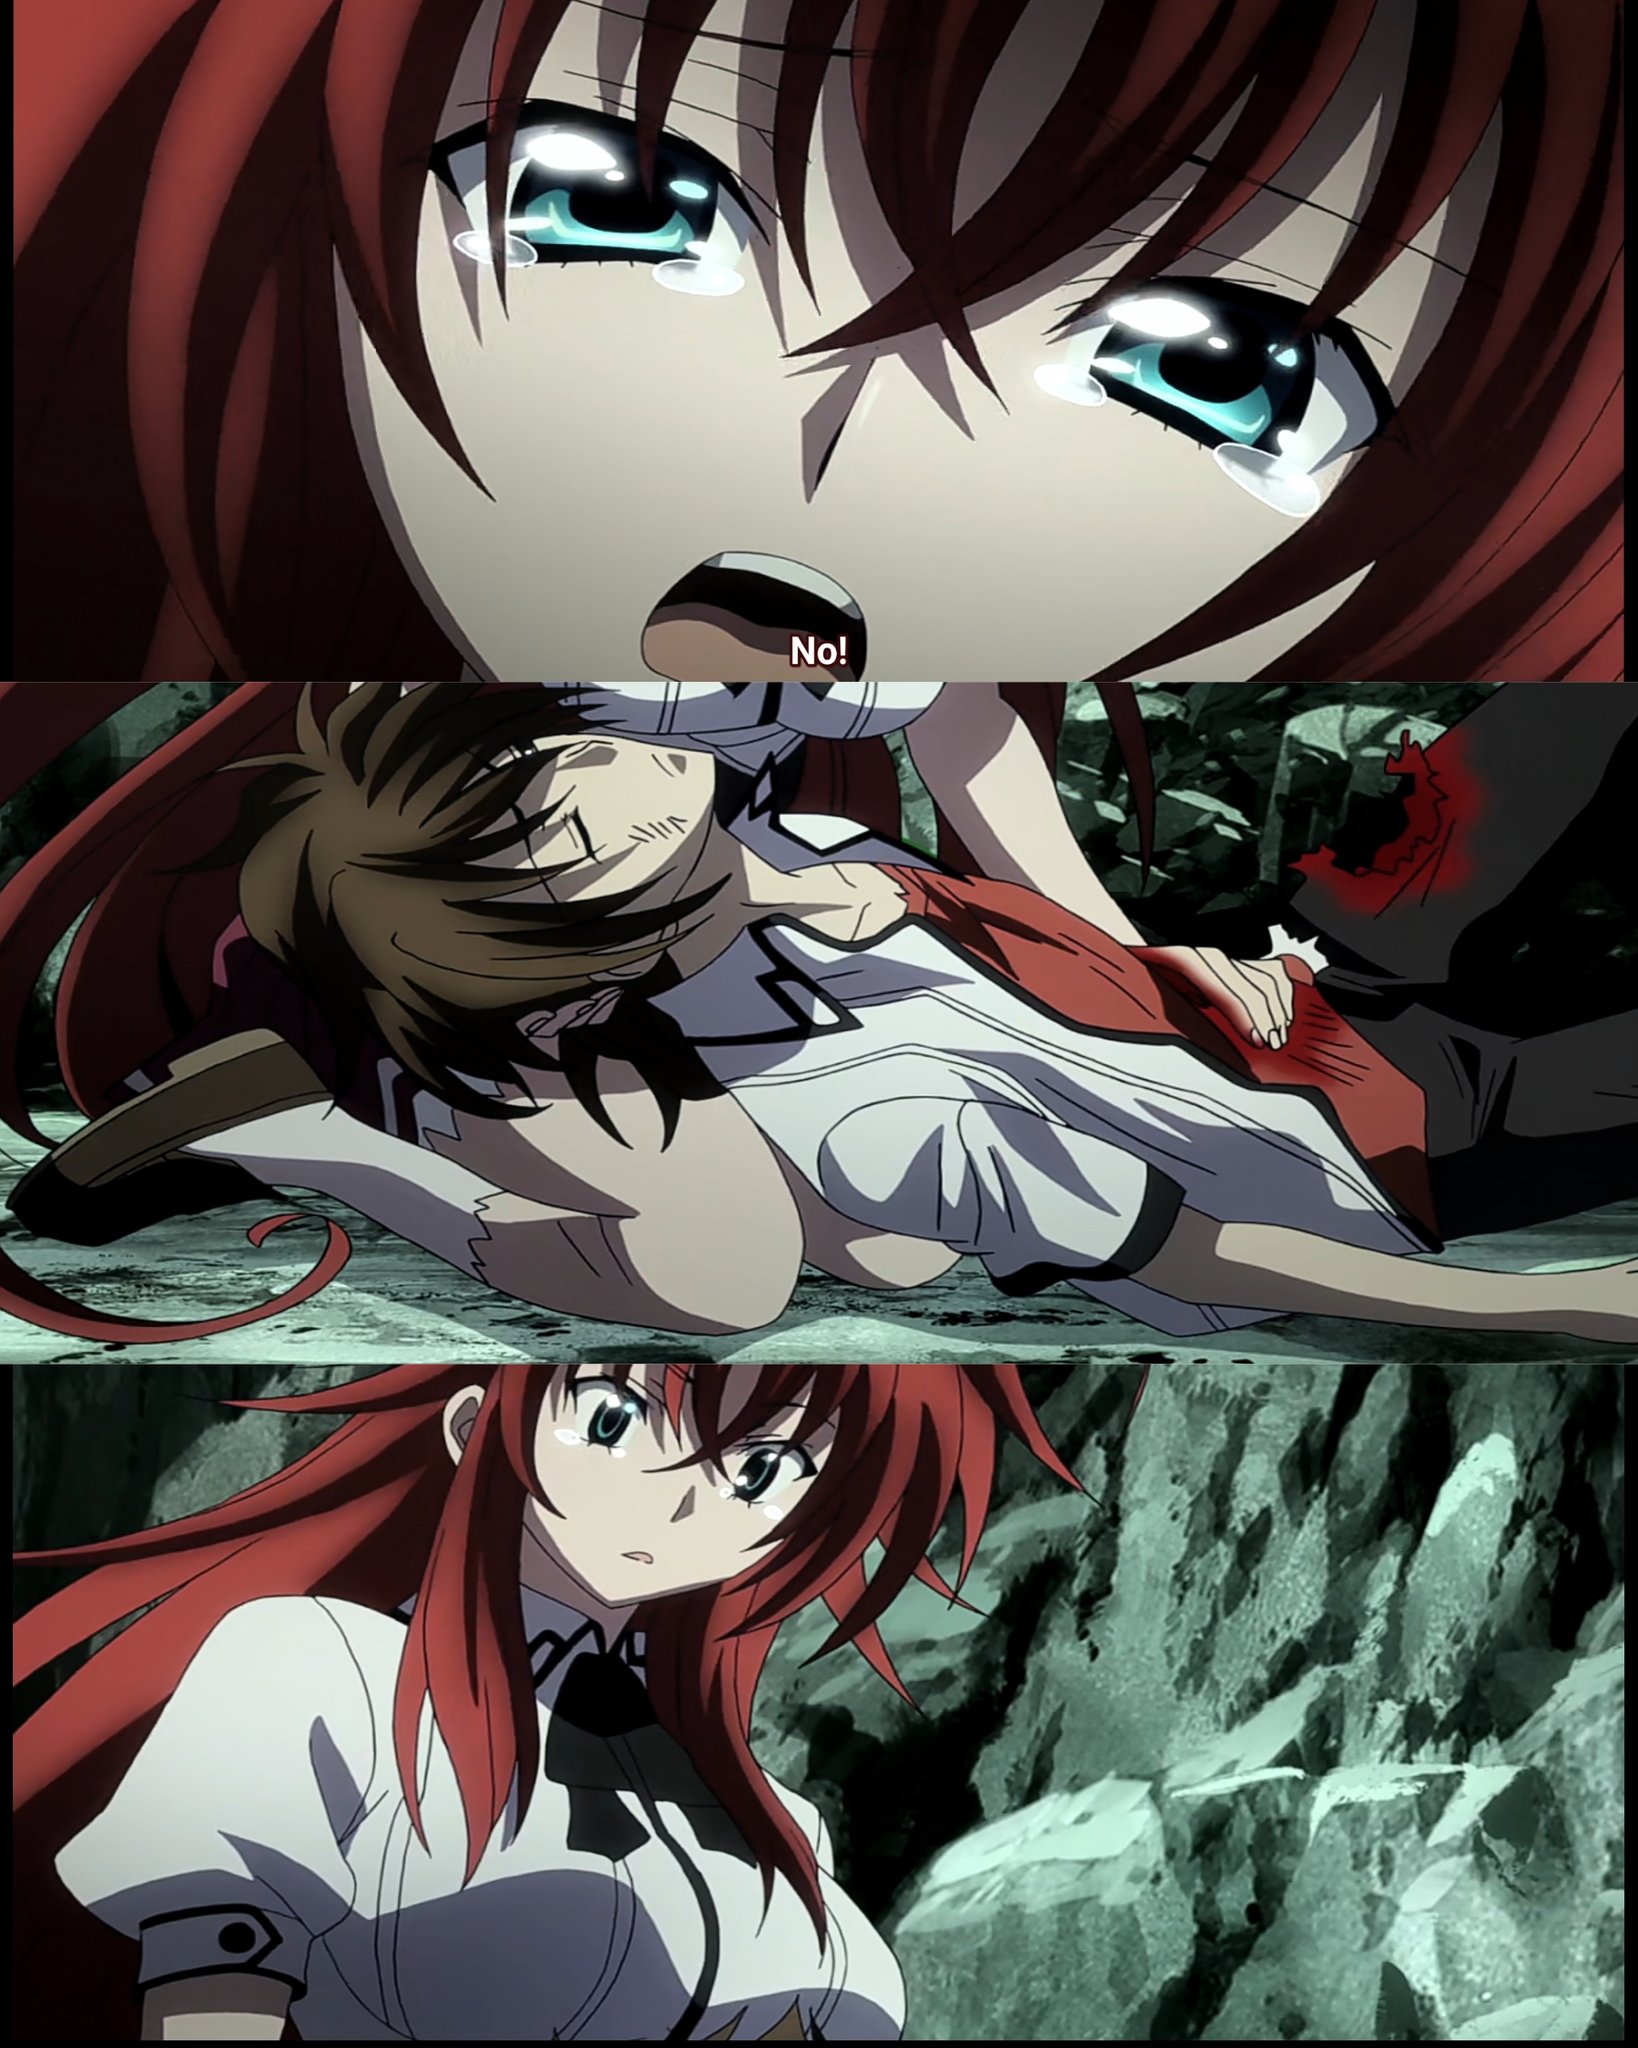 Issei The Red Dragon Emperor on X: MFs give us S5 of High School DxD  #HighSchoolDxD #RiasGremory #Issei #Anime  / X